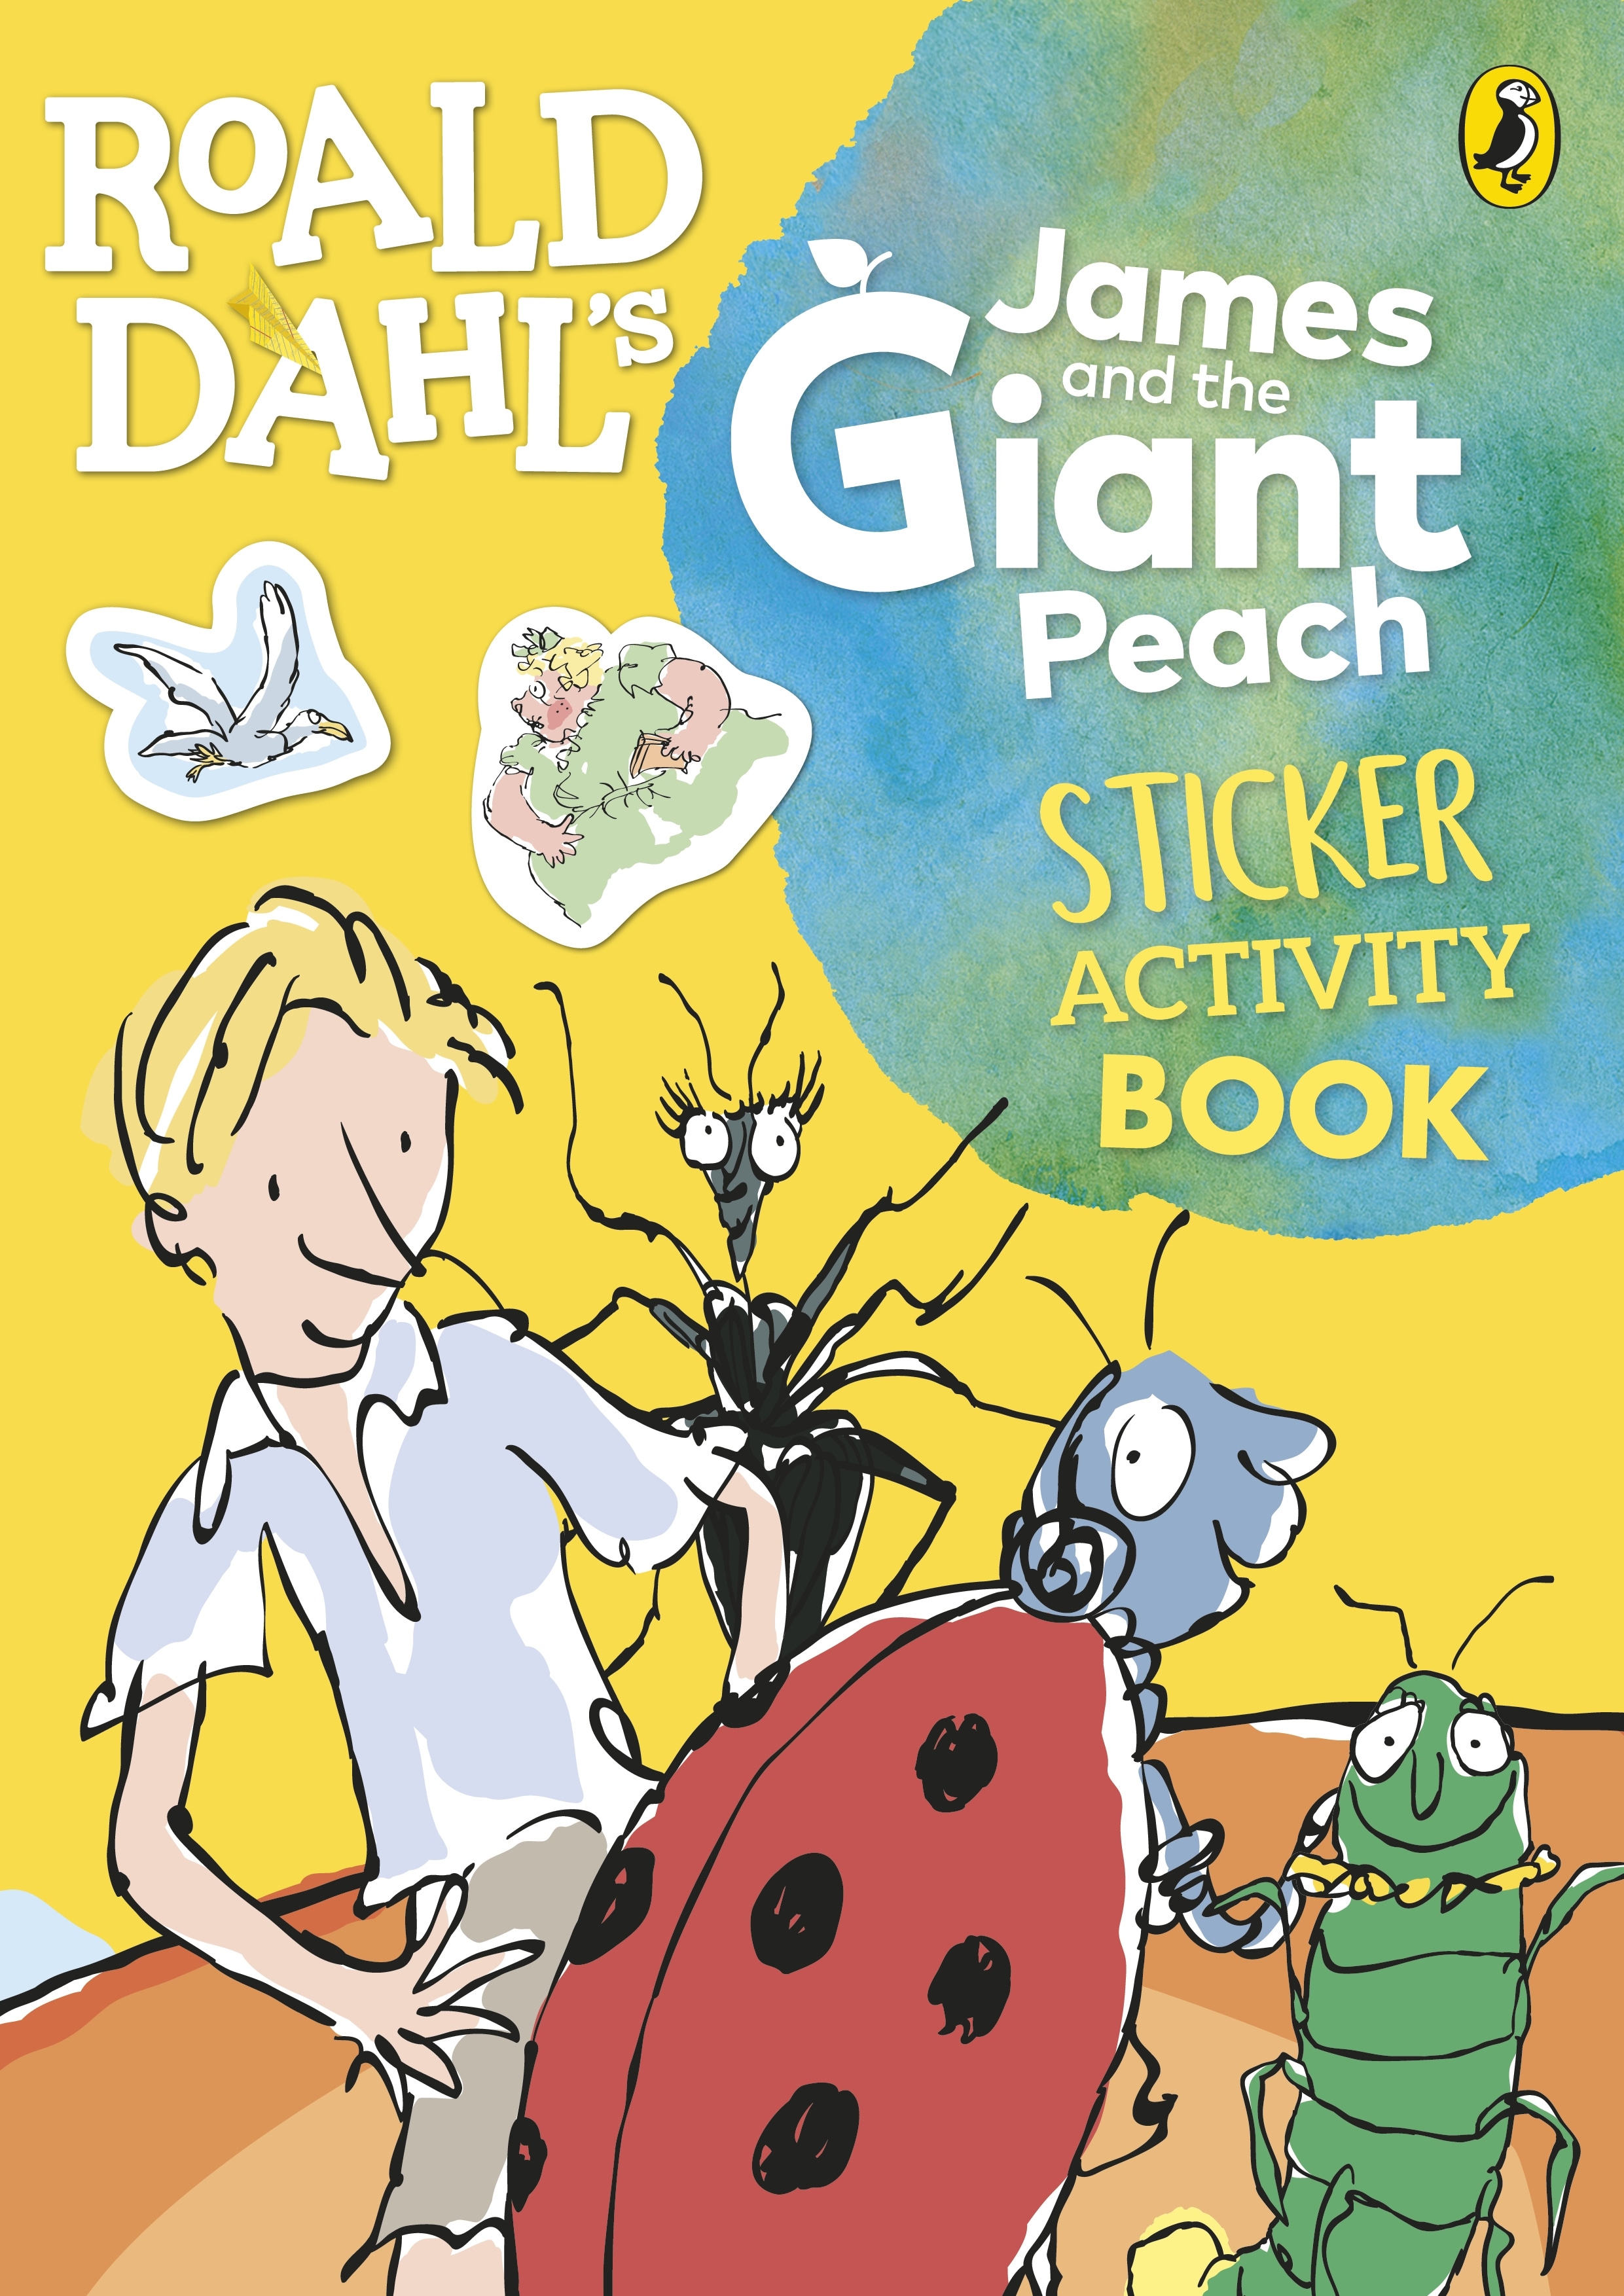 Book “Roald Dahl's James and the Giant Peach Sticker Activity Book” by Roald Dahl — May 3, 2018